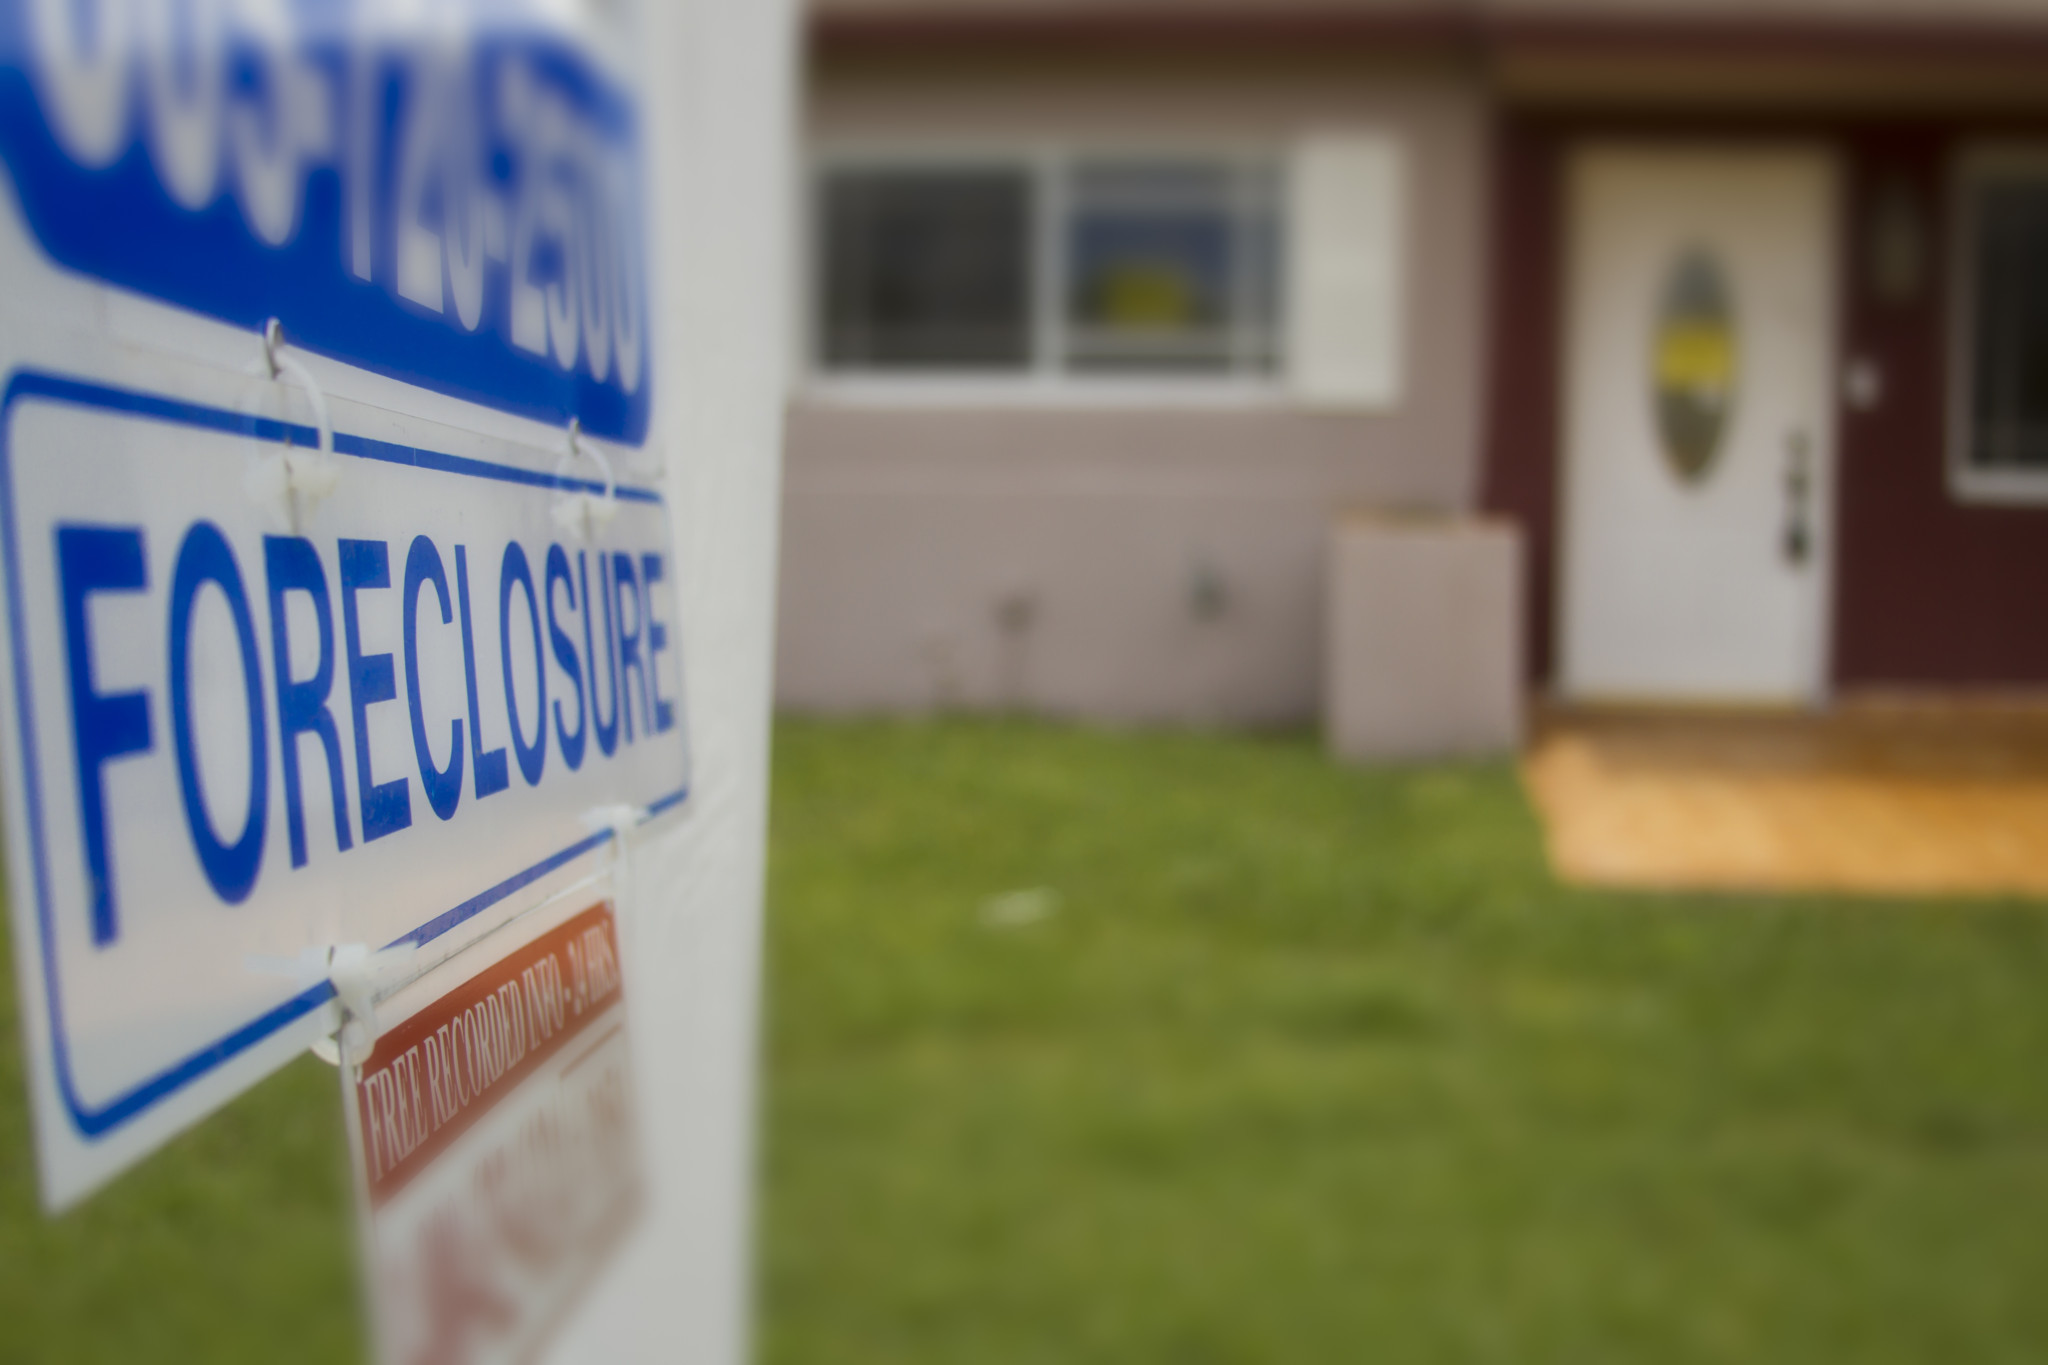 how hard is it to buy fannie mae foreclosures